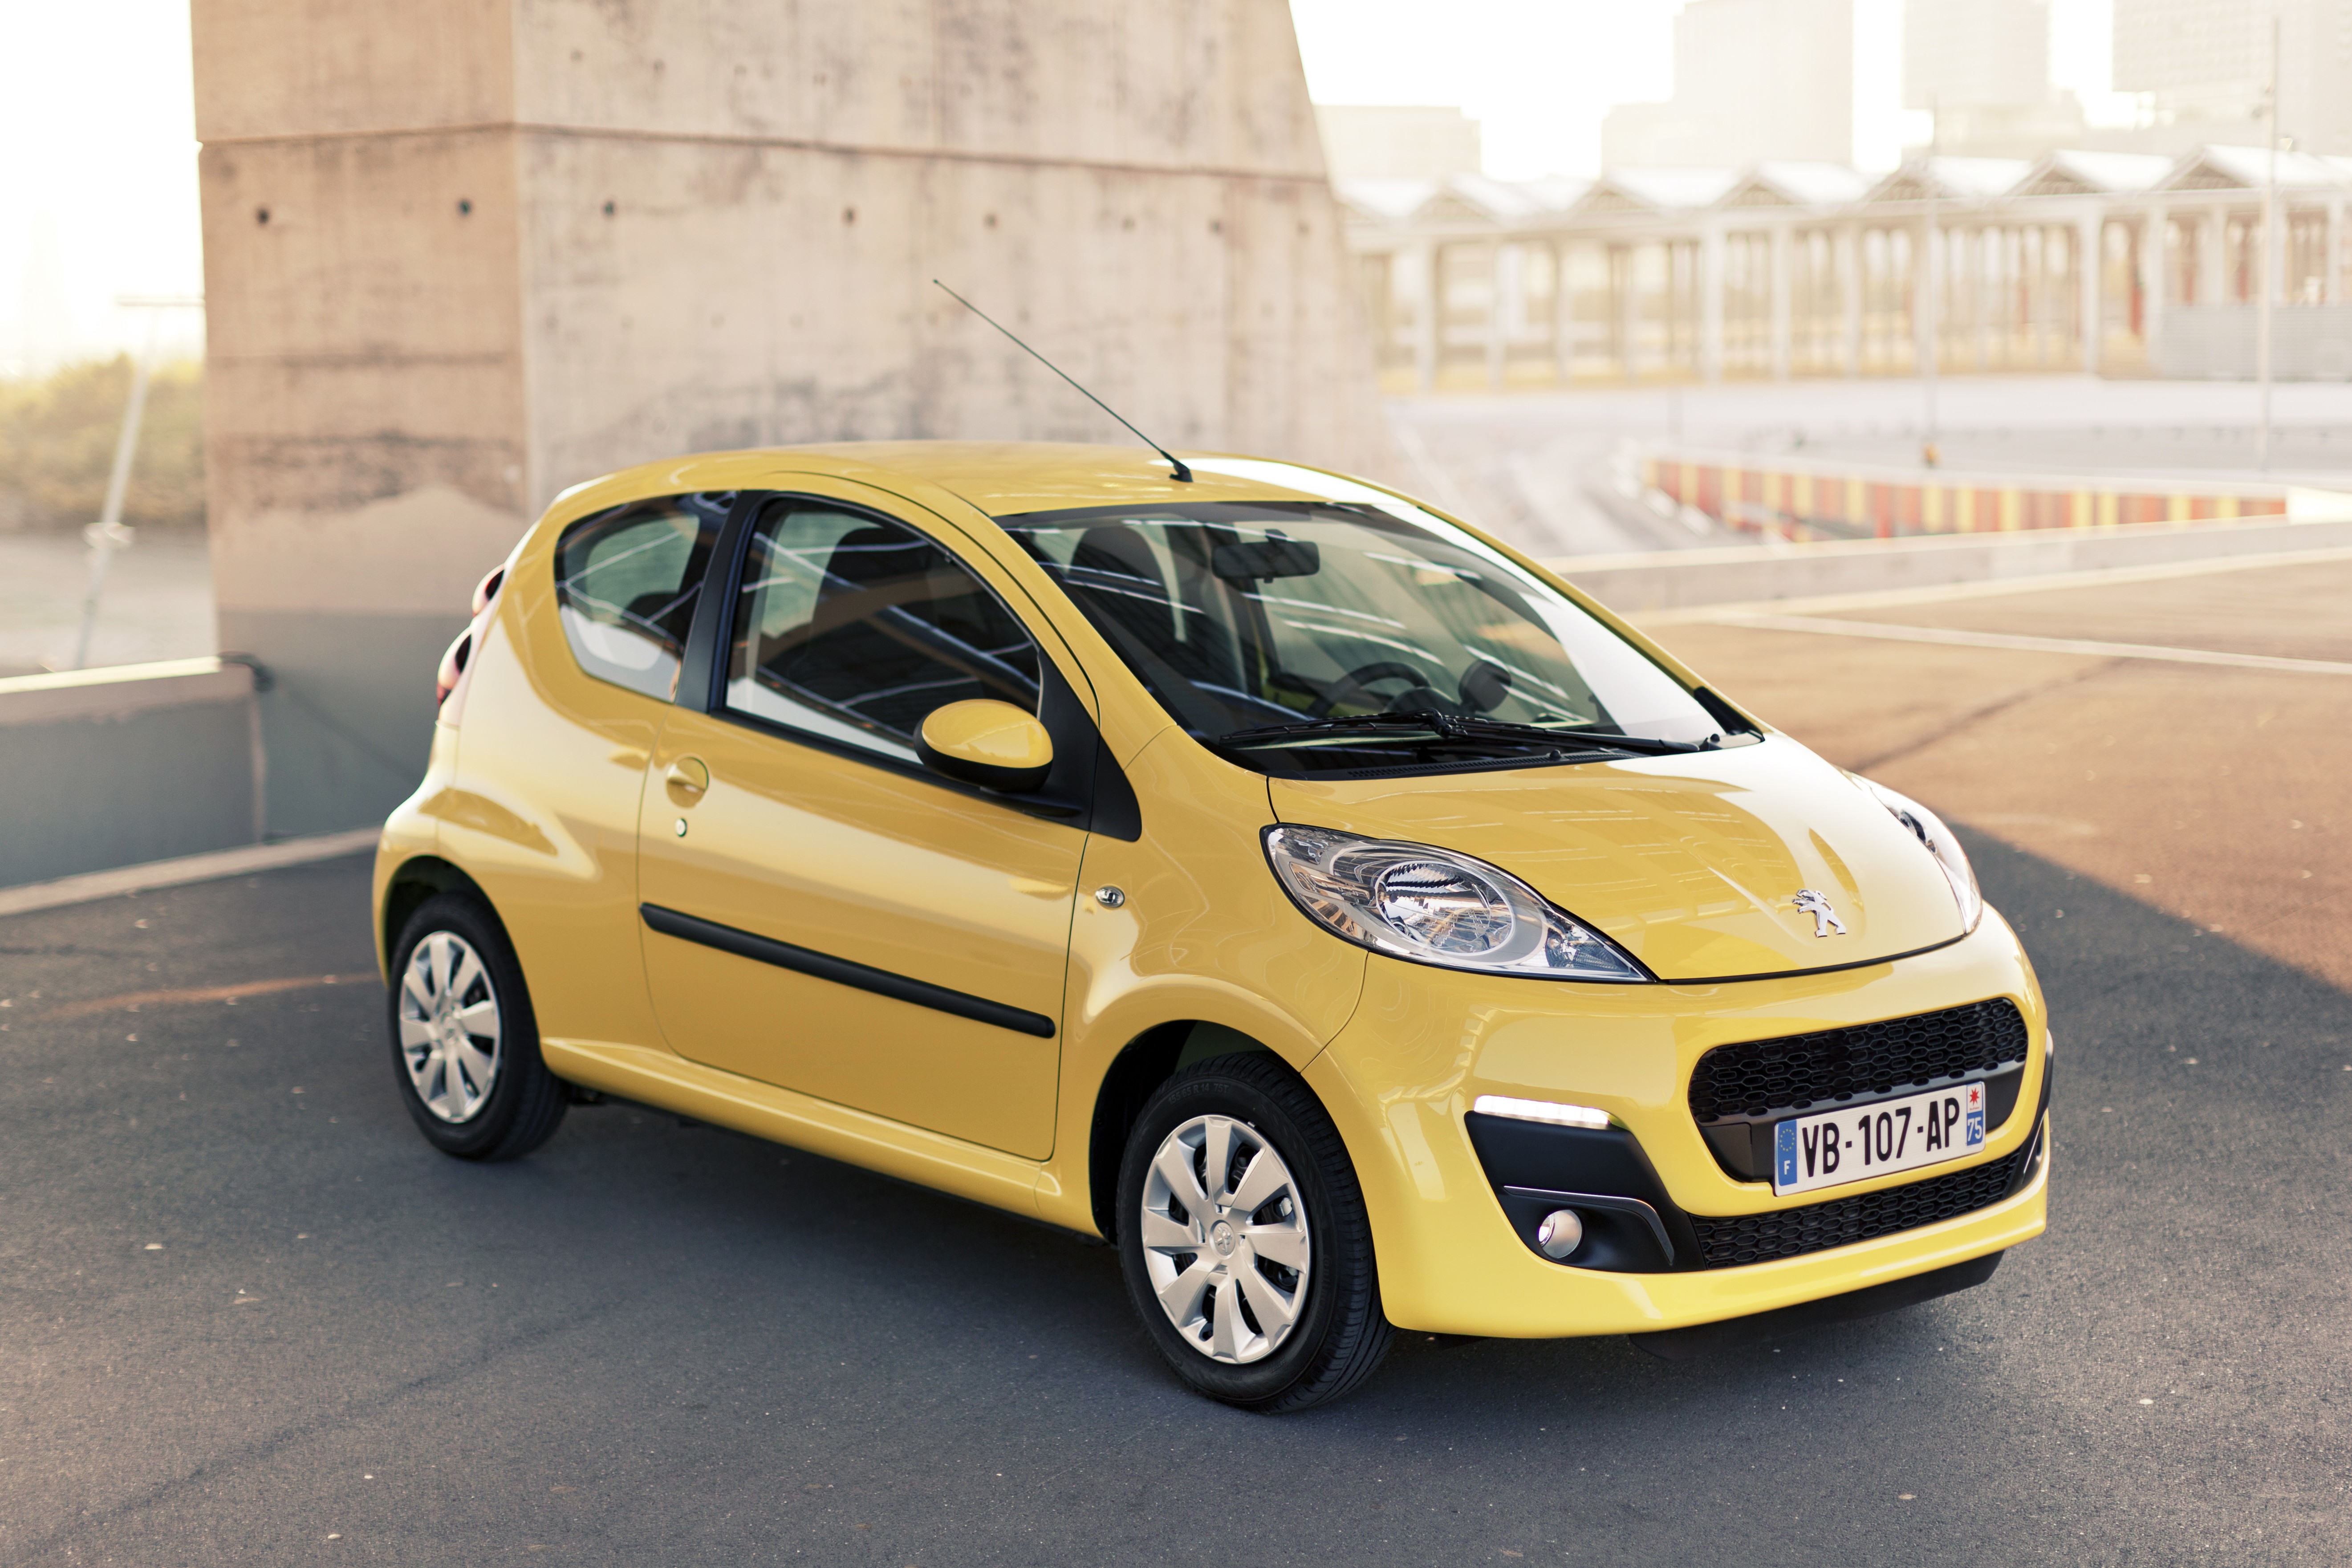 Peugeot 107 gets reworked for 2012 - hatch gets new face, upgraded ...